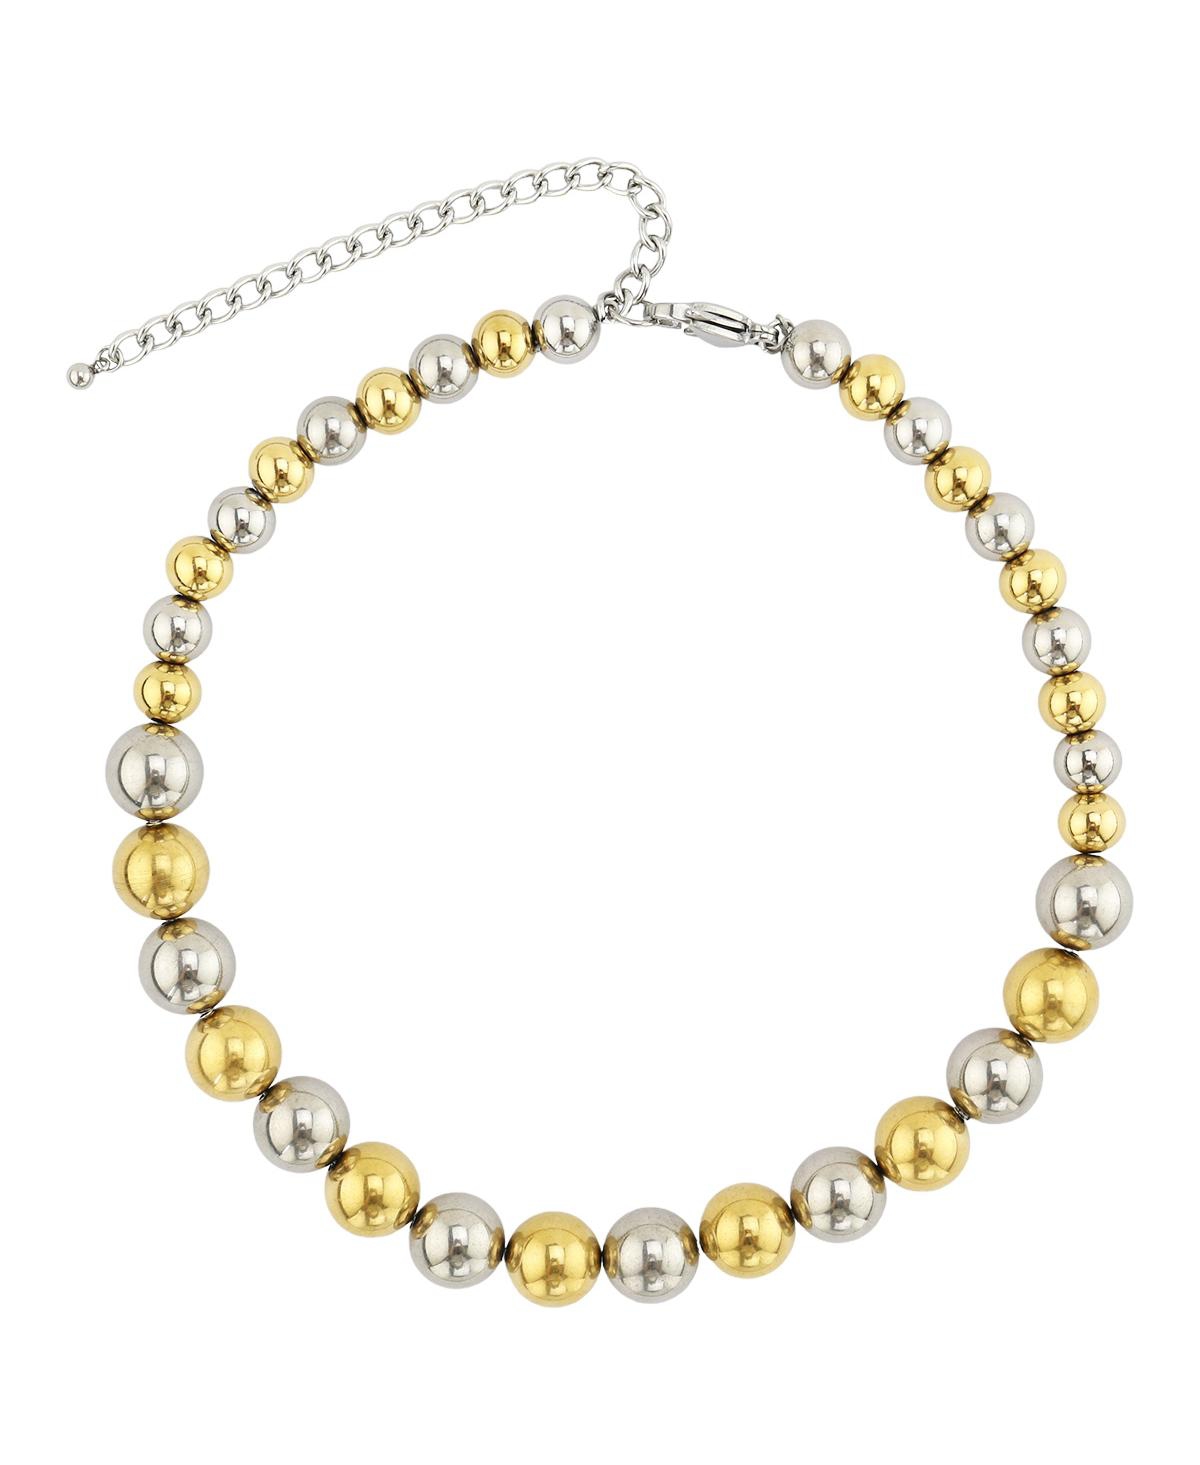 Carter Beaded Necklace - Two tone